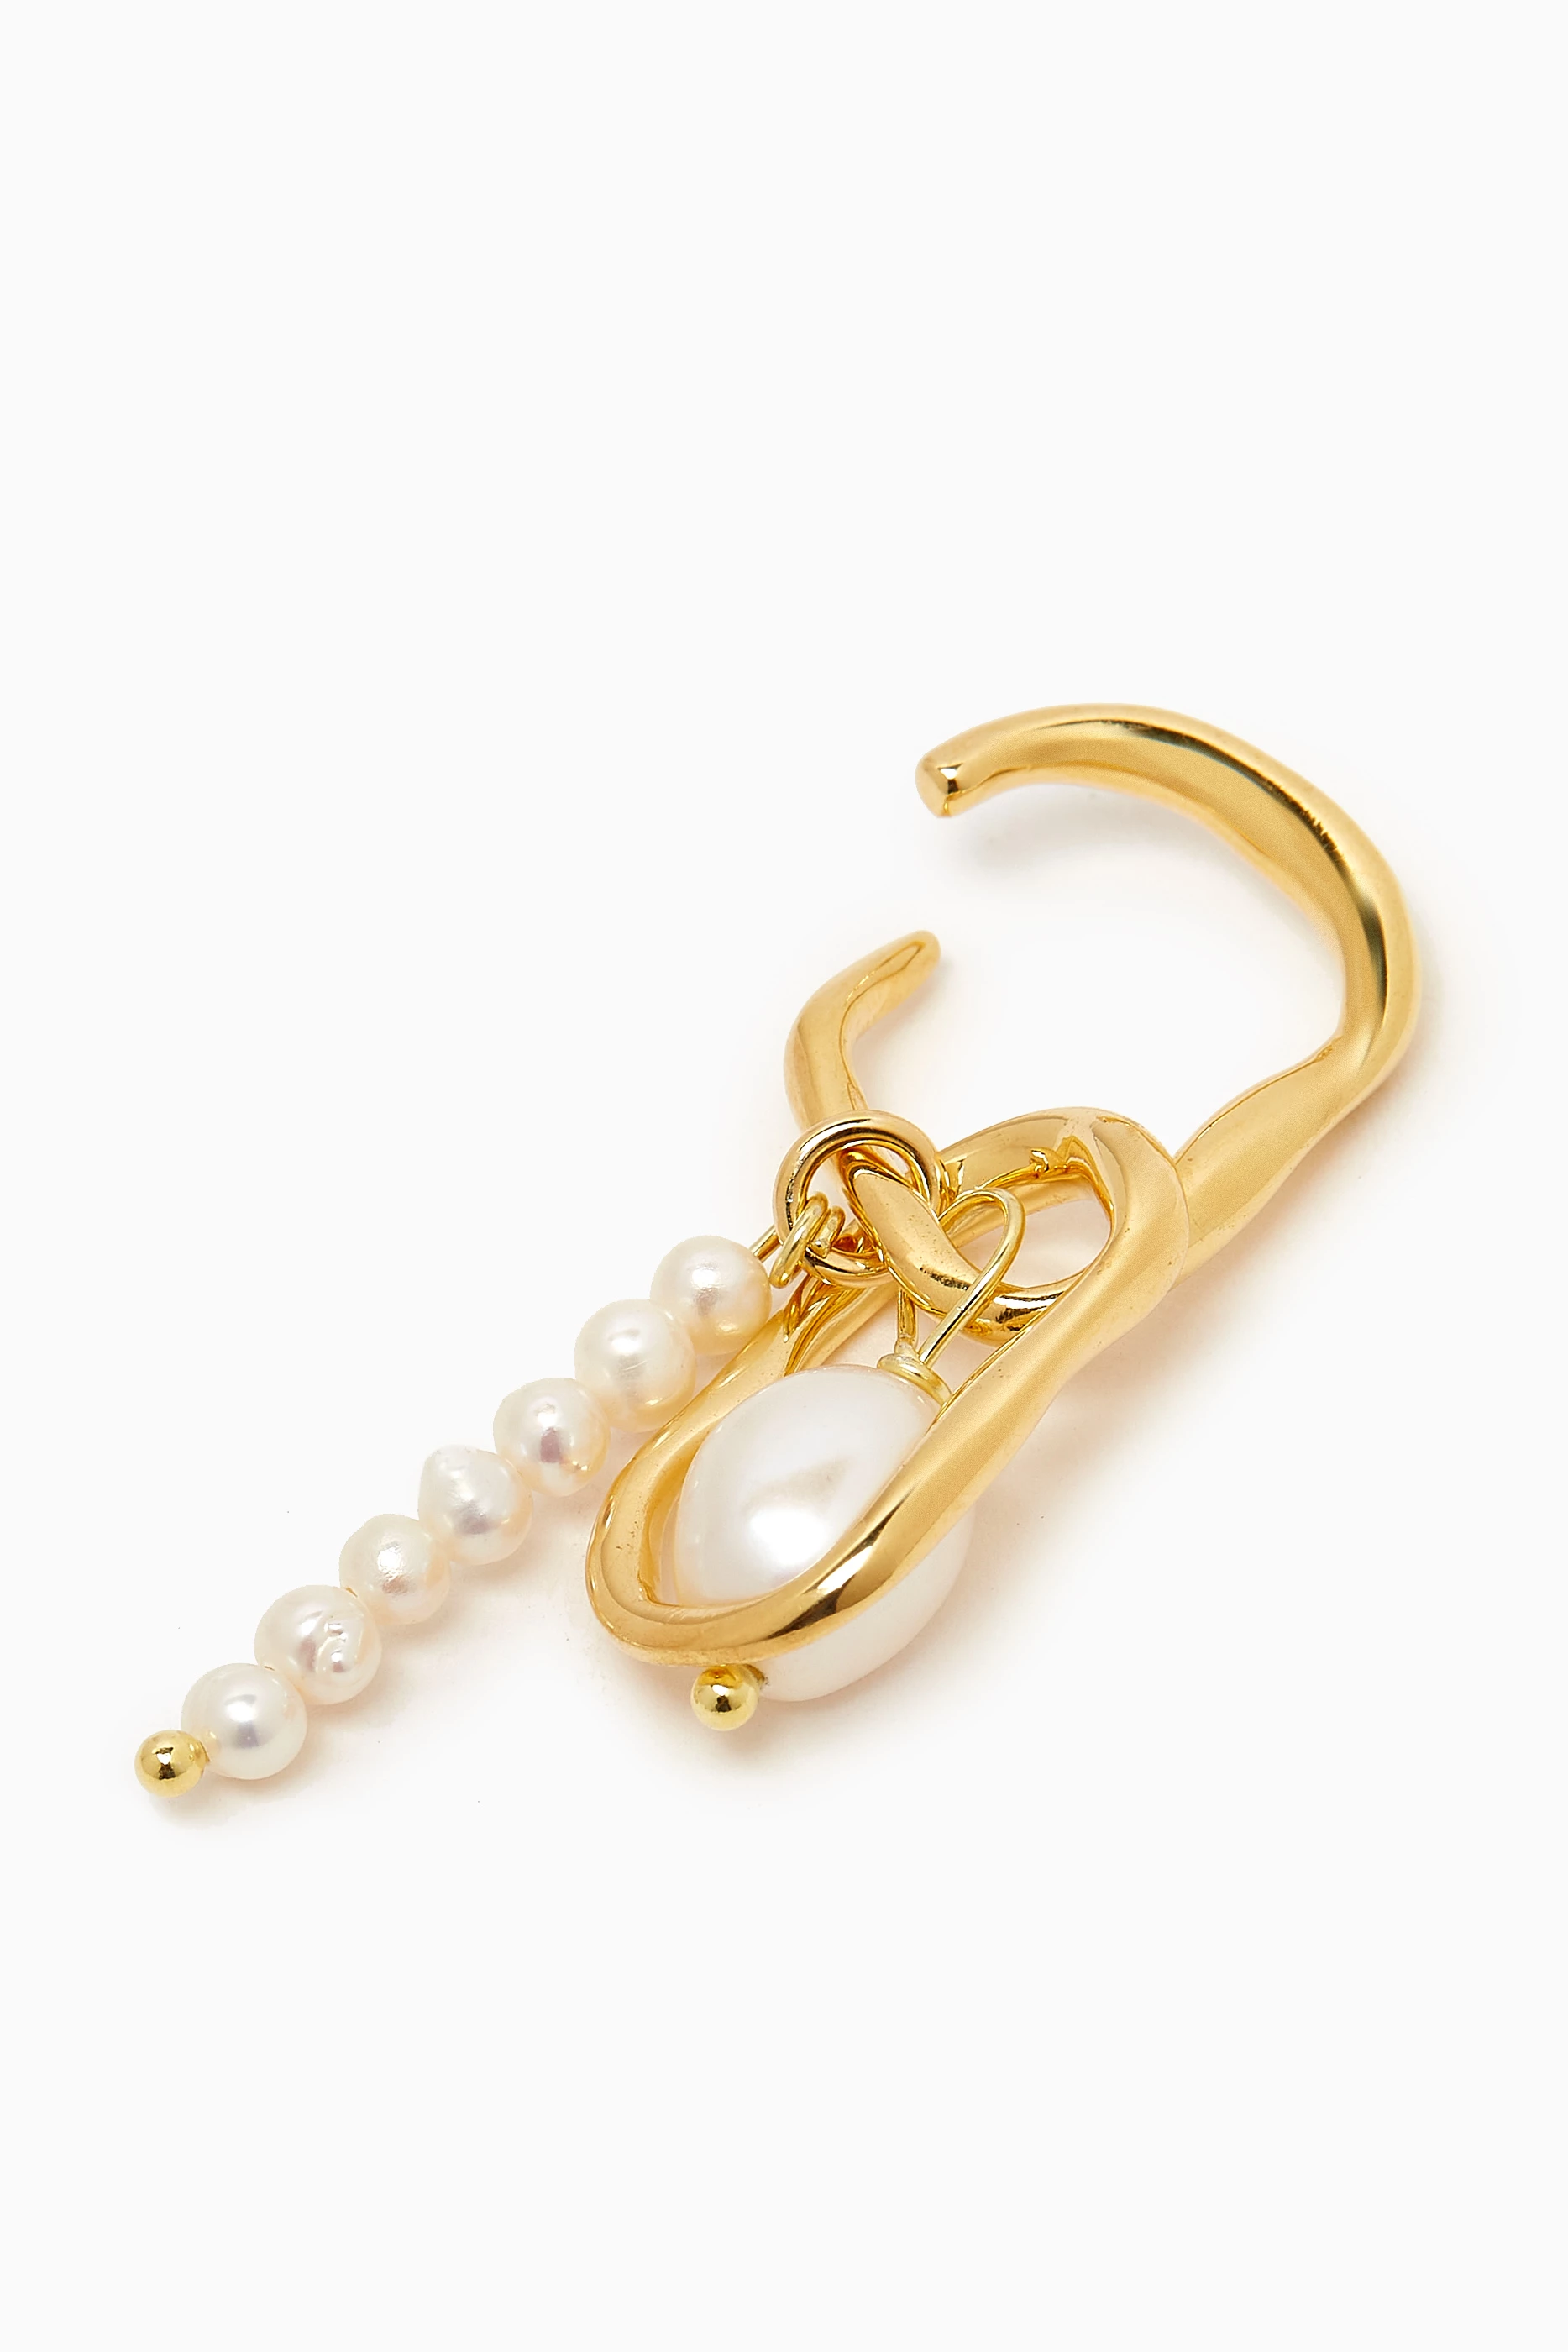 Buy Bonvo White Hola Pearl Single Left Ear Cuff in 18kt Gold